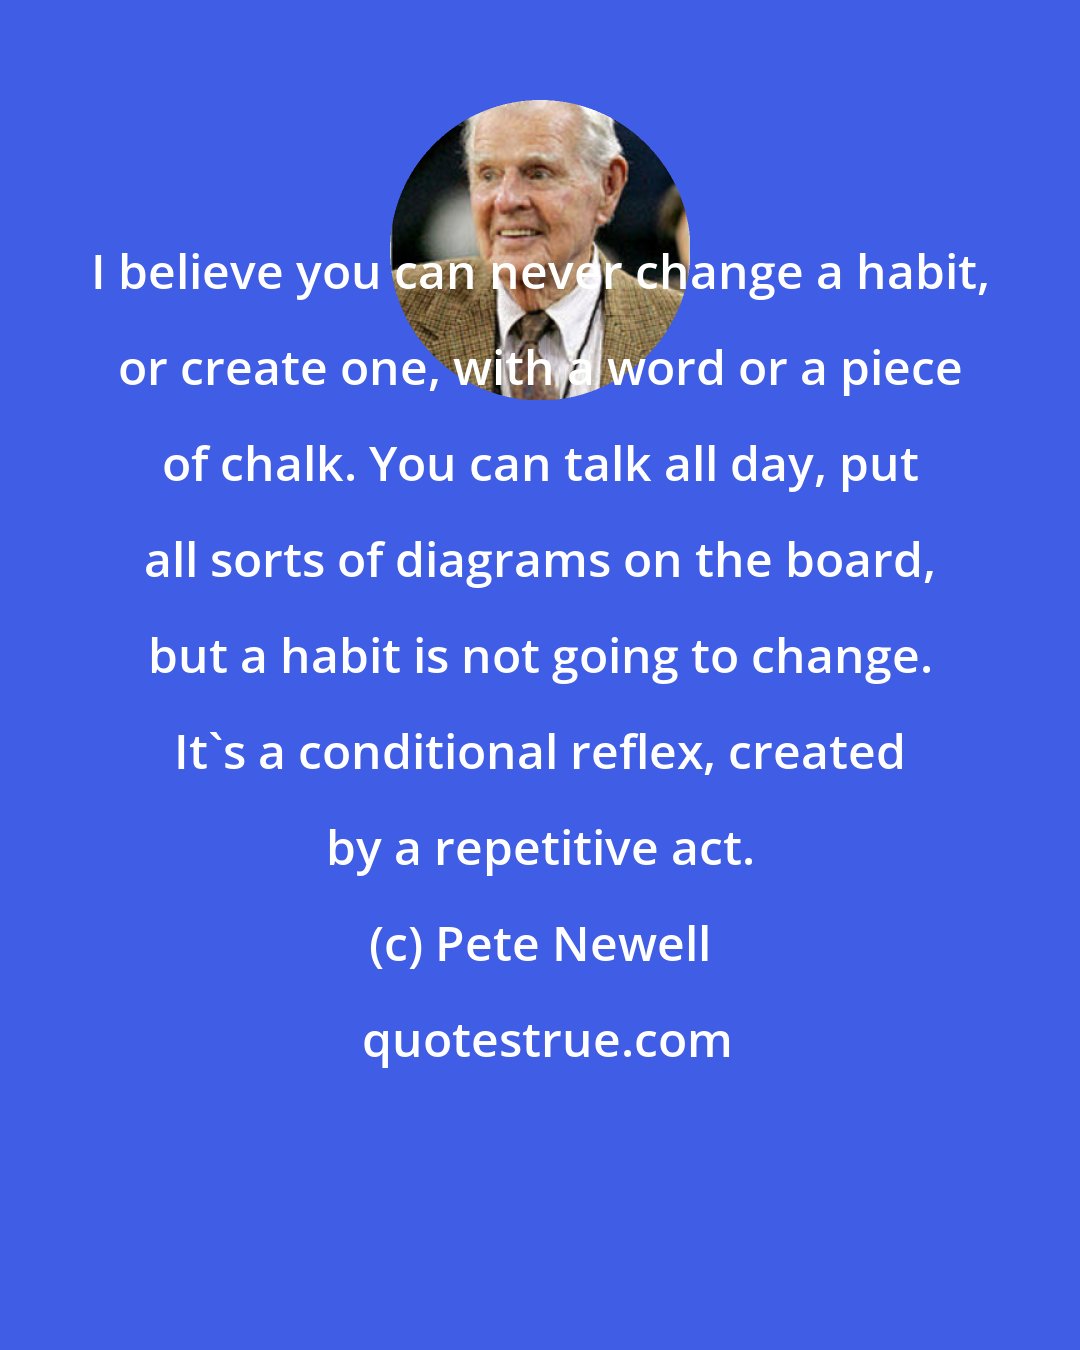 Pete Newell: I believe you can never change a habit, or create one, with a word or a piece of chalk. You can talk all day, put all sorts of diagrams on the board, but a habit is not going to change. It's a conditional reflex, created by a repetitive act.